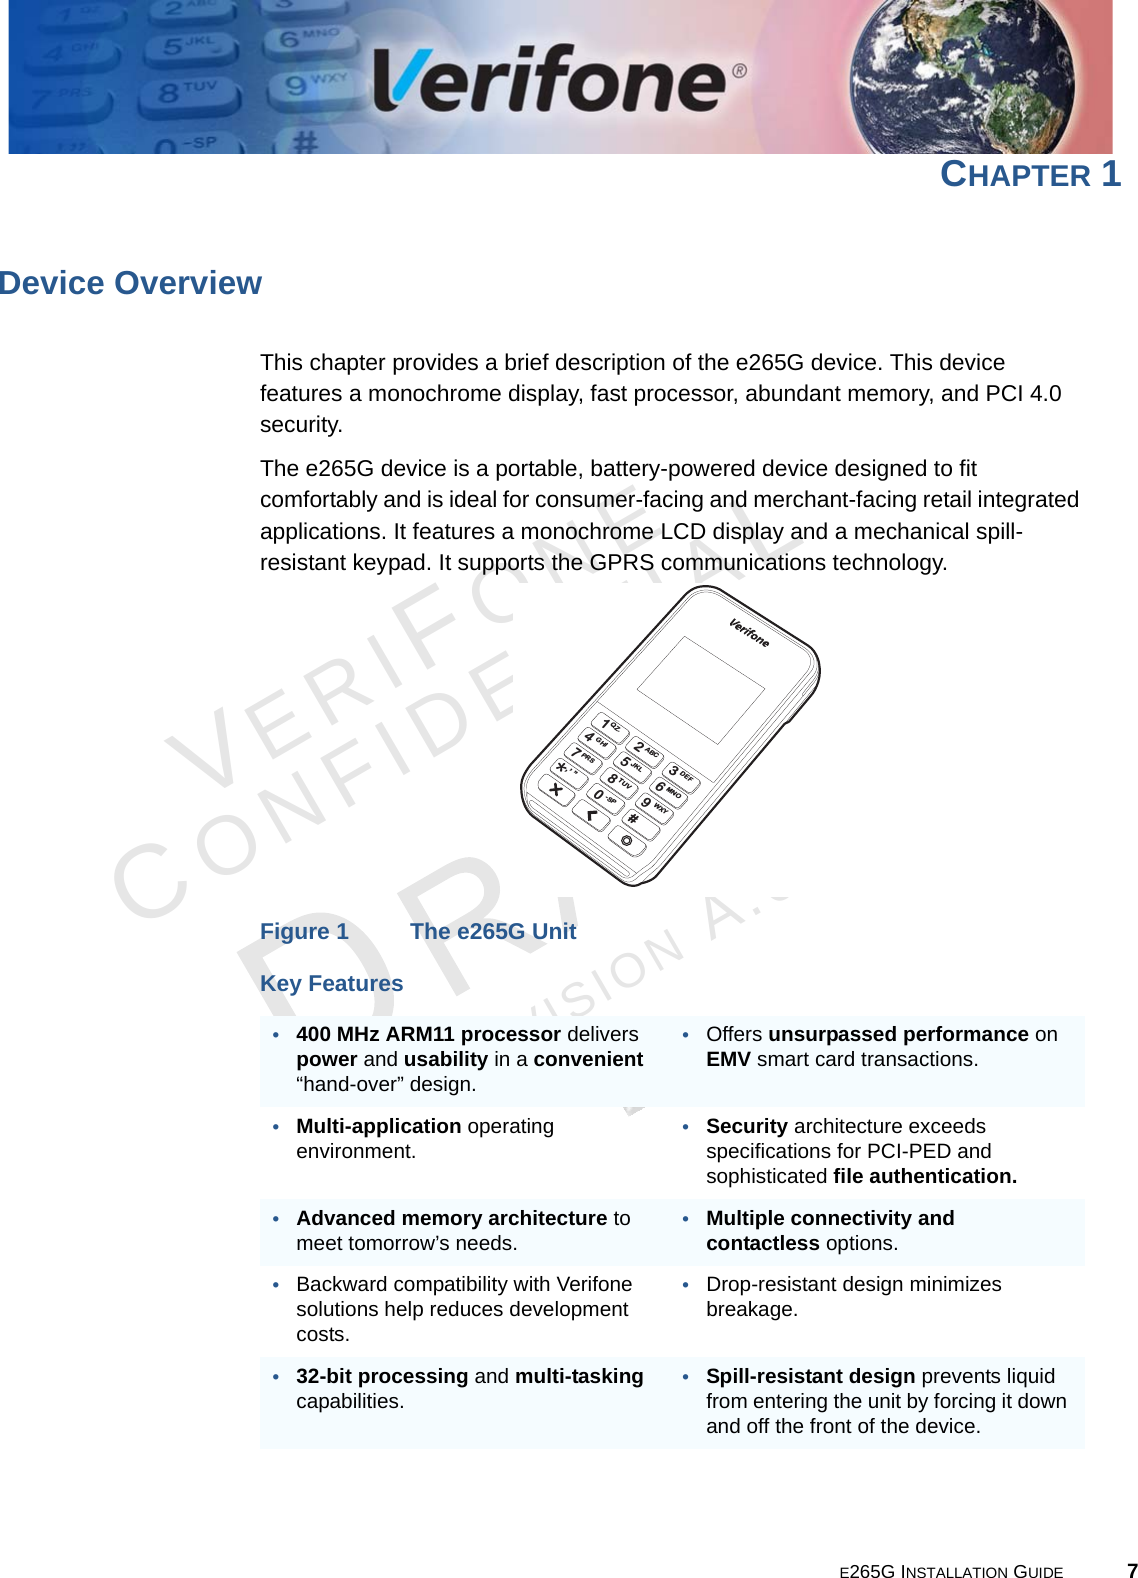 E265G INSTALLATION GUIDE 7VERIFONECONFIDENTIALREVISION A.6 CHAPTER 1Device OverviewThis chapter provides a brief description of the e265G device. This device features a monochrome display, fast processor, abundant memory, and PCI 4.0 security.The e265G device is a portable, battery-powered device designed to fit comfortably and is ideal for consumer-facing and merchant-facing retail integrated applications. It features a monochrome LCD display and a mechanical spill-resistant keypad. It supports the GPRS communications technology.Figure 1 The e265G UnitKey Features•400 MHz ARM11 processor delivers power and usability in a convenient “hand-over” design.•Offers unsurpassed performance on EMV smart card transactions.•Multi-application operating environment.•Security architecture exceeds specifications for PCI-PED and sophisticated file authentication.•Advanced memory architecture to meet tomorrow’s needs.•Multiple connectivity and contactless options.•Backward compatibility with Verifone solutions help reduces development costs.•Drop-resistant design minimizes breakage.•32-bit processing and multi-tasking capabilities.•Spill-resistant design prevents liquid from entering the unit by forcing it down and off the front of the device.*1QZ.2ABC4GHI5JKL7PRS,,,,#8TUV0-SP9WXY6MNO3DEF